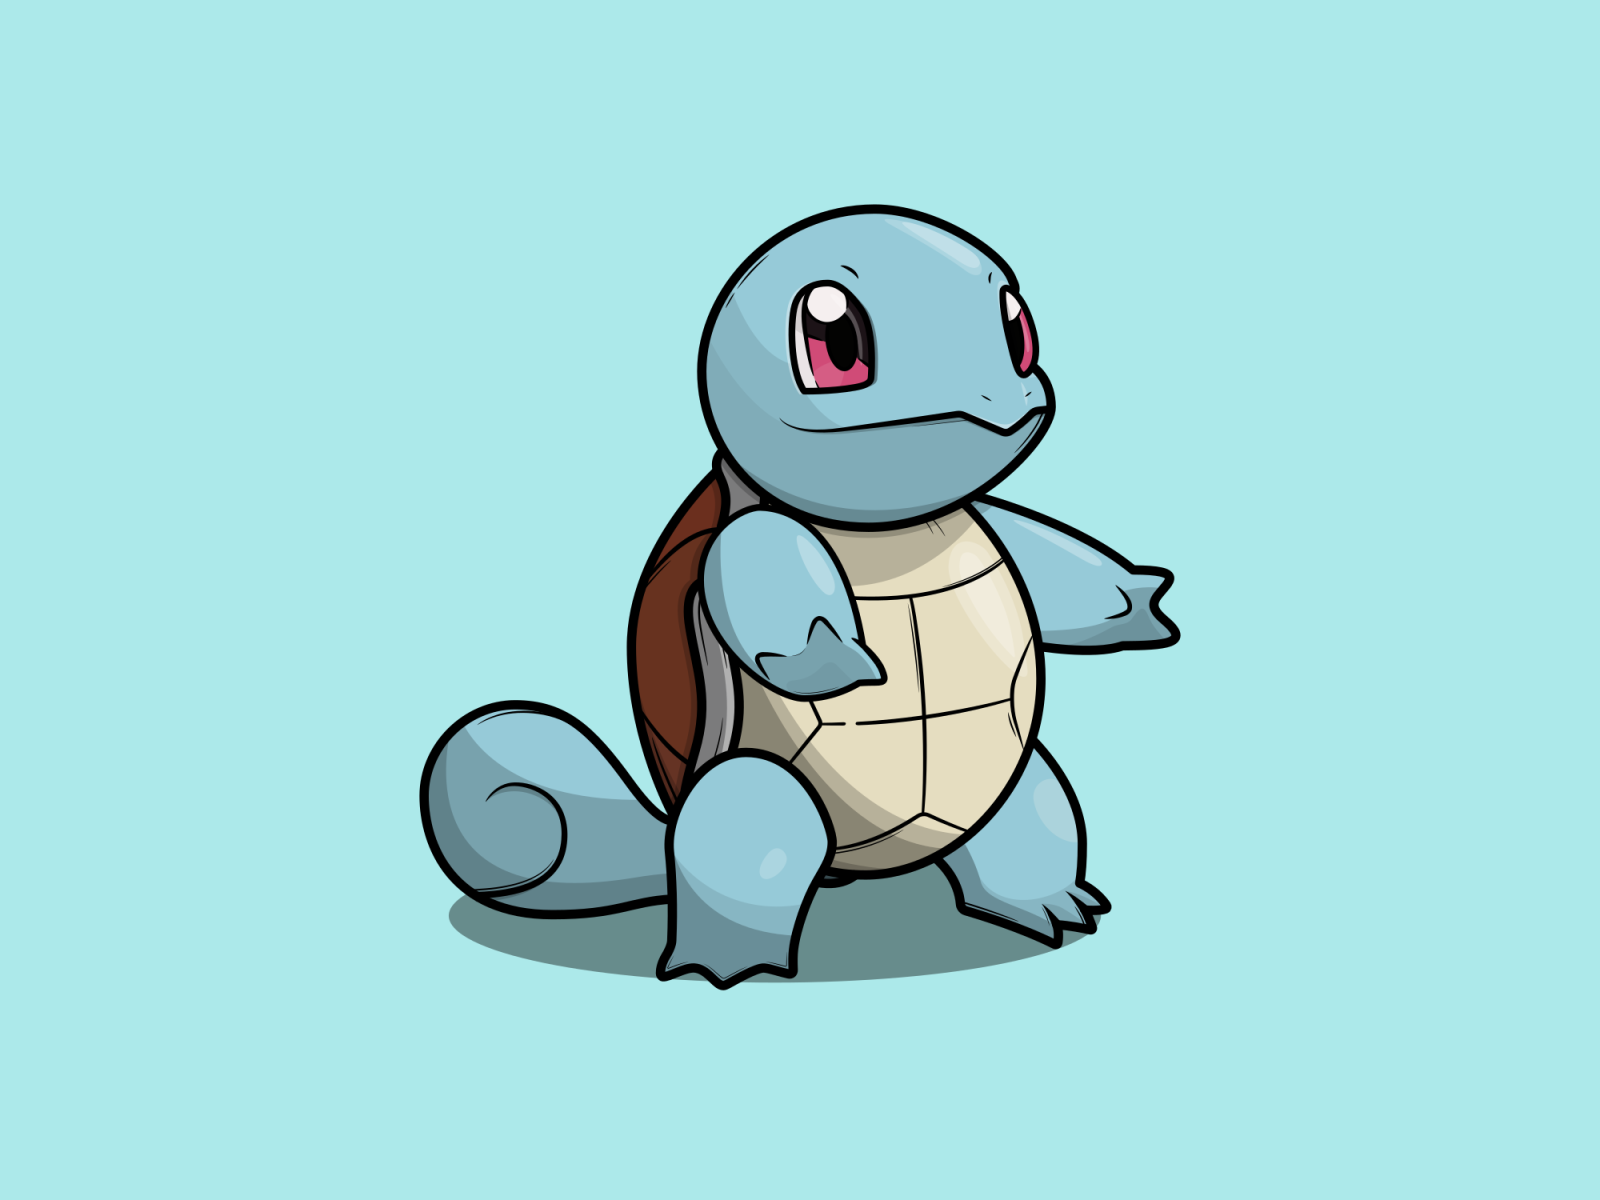 drbl_Pokemon_Squirtle.png. 